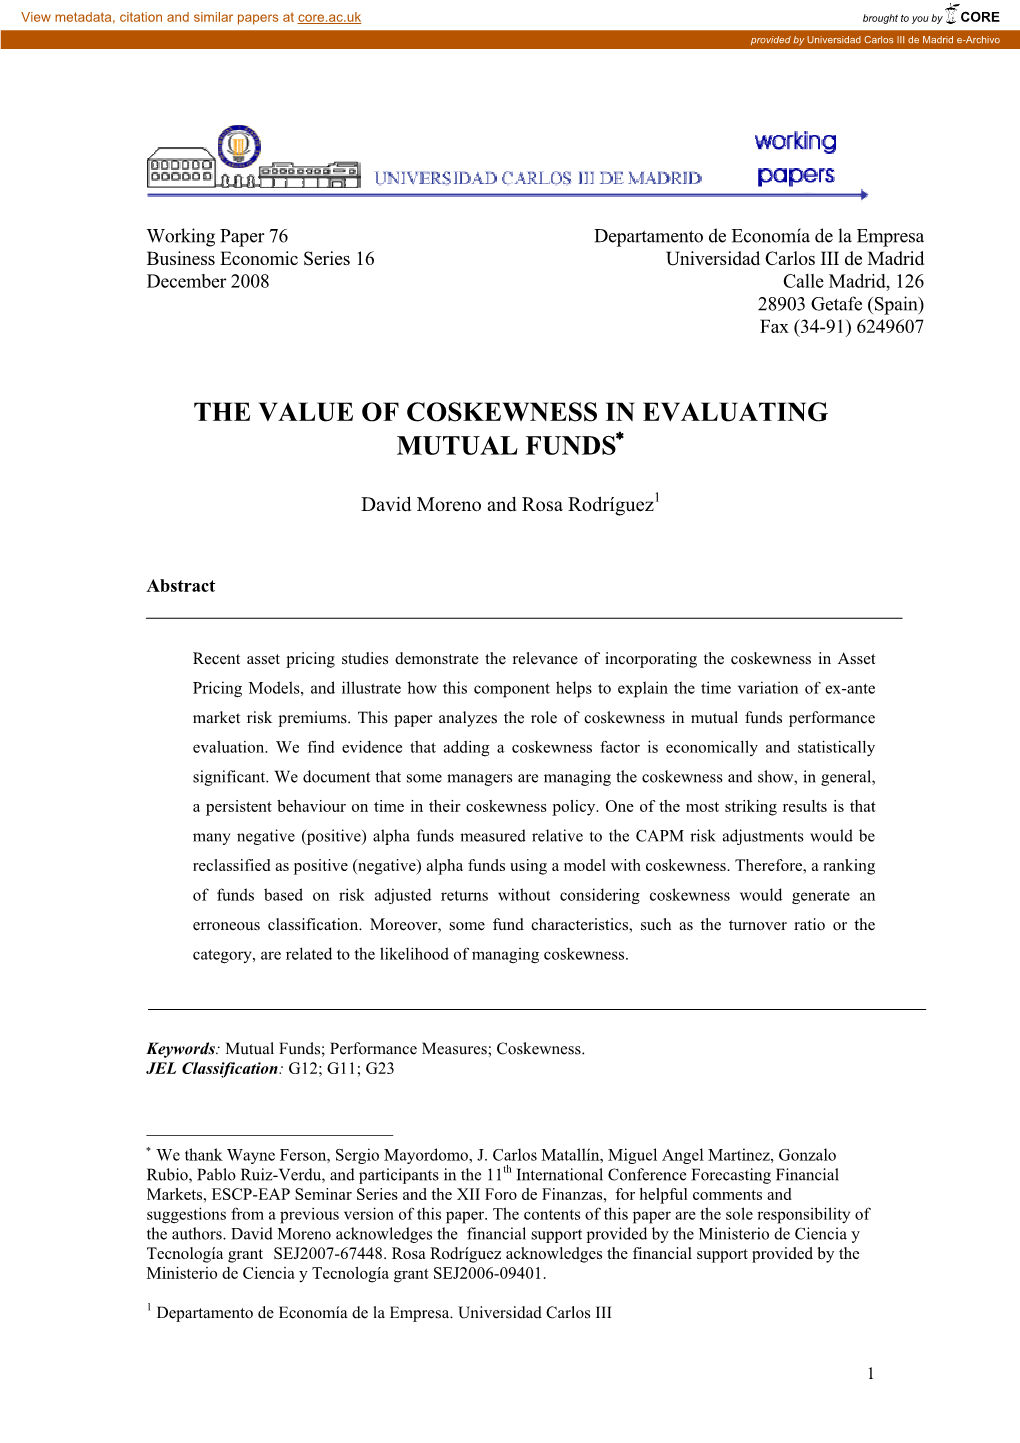 The Value of Coskewness in Evaluating Mutual Funds∗